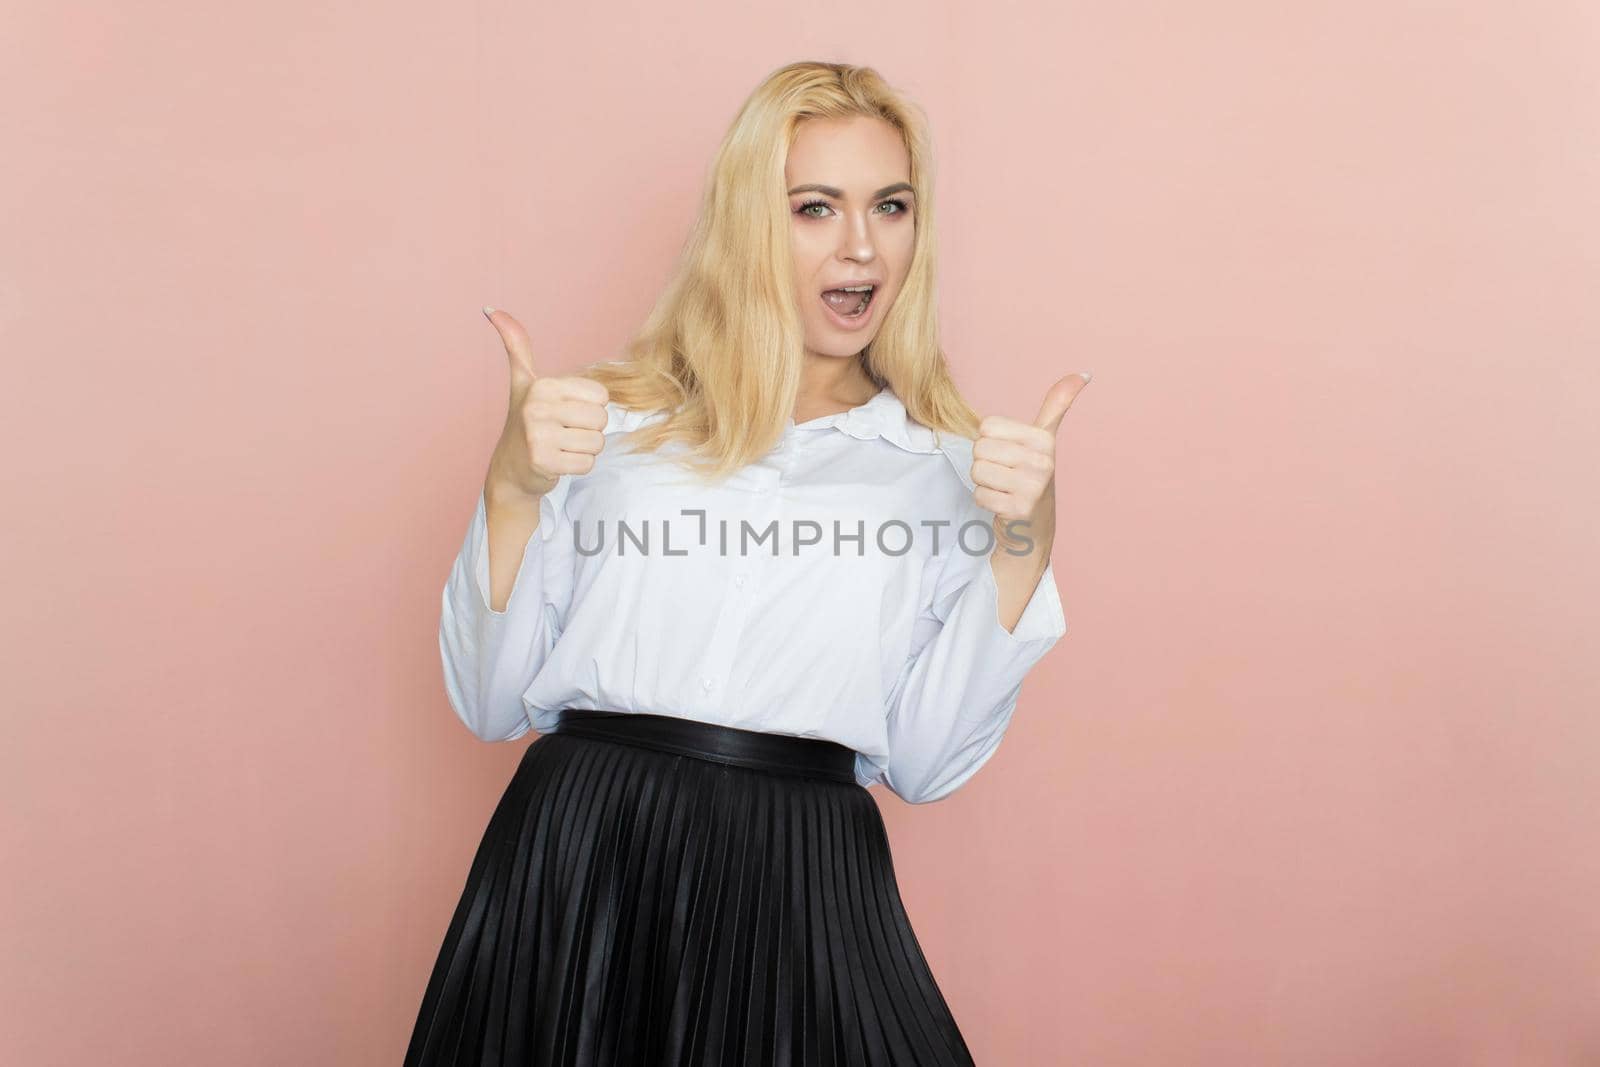 Beauty, fashion portrait. Elegant business style. Portrait of a beautiful blonde woman in white blouse and black skirt posing at studio on a pink background.